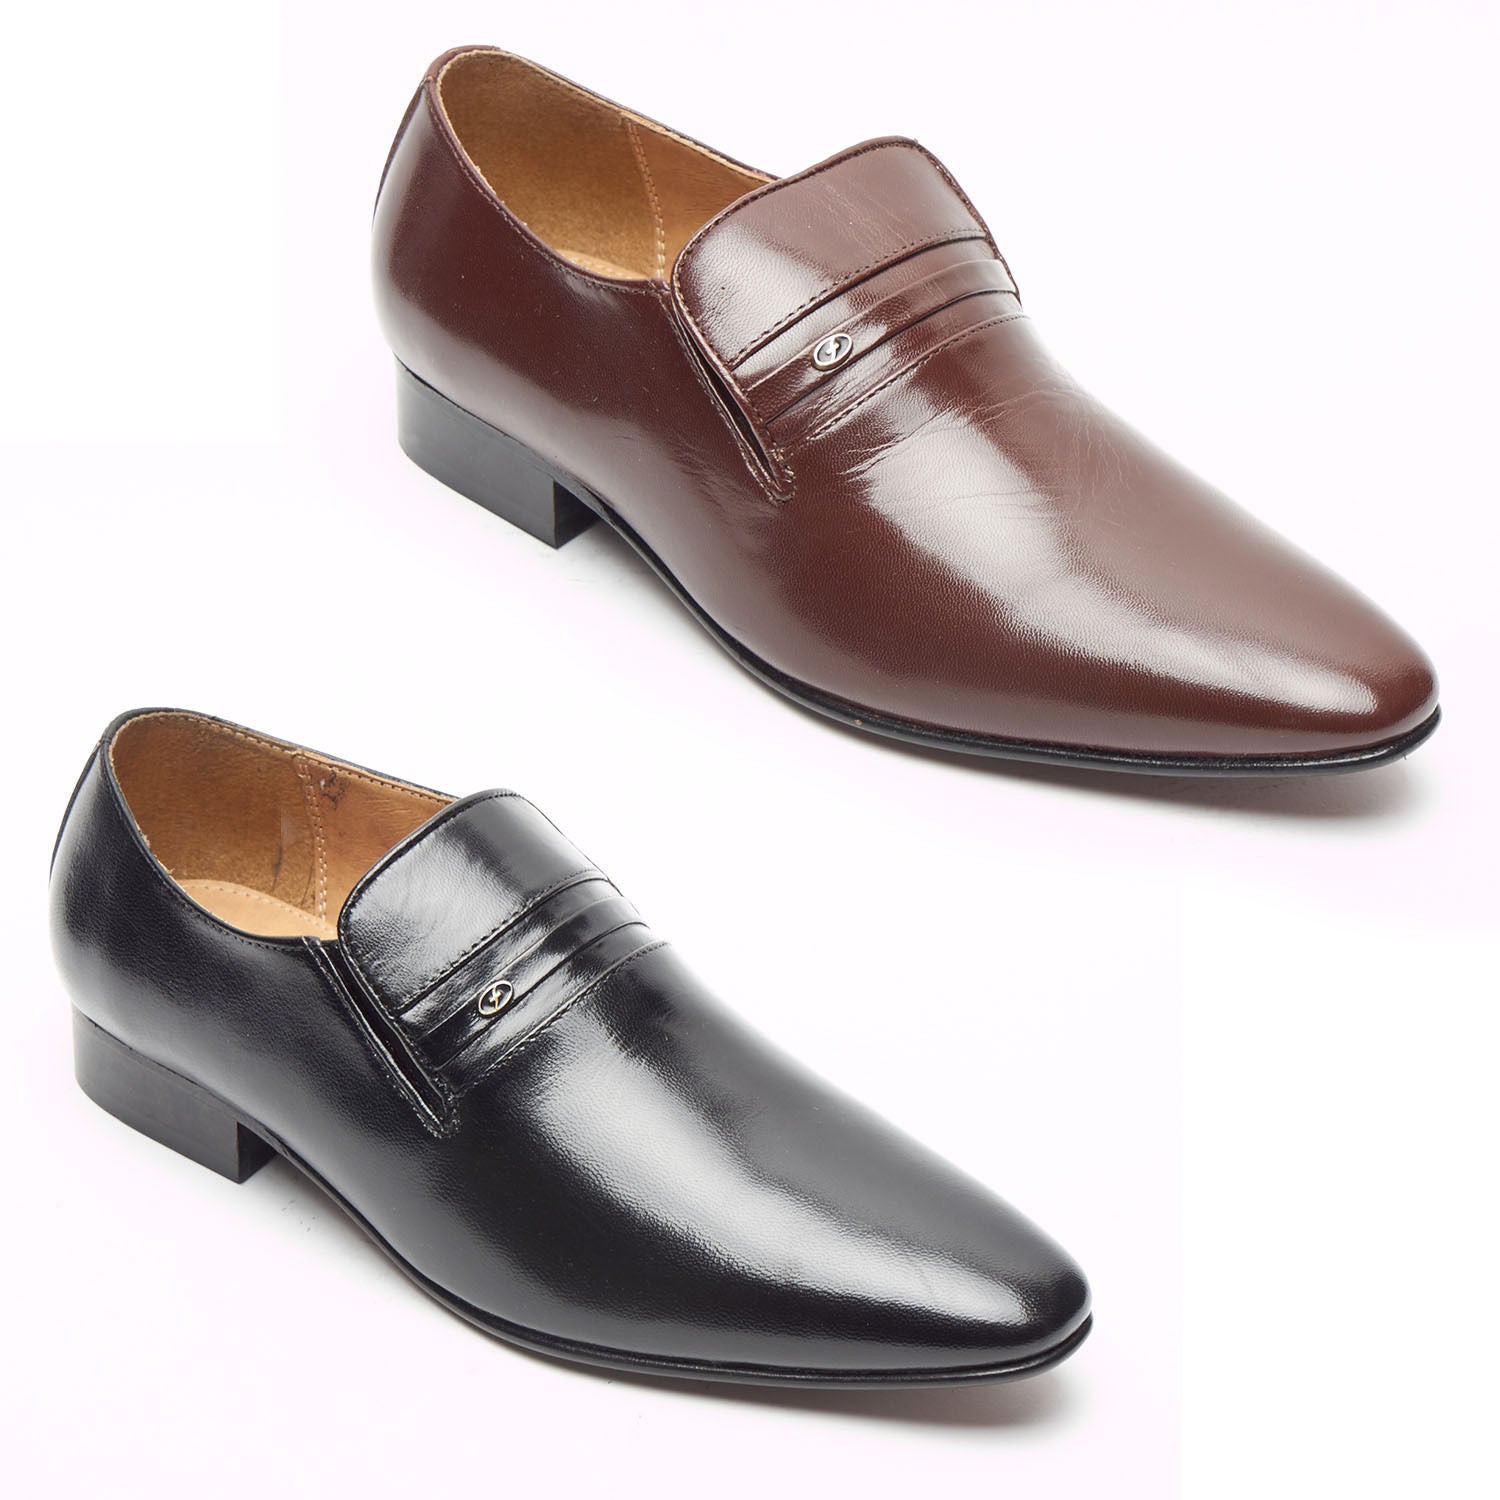 Mens Leather Spanish Shoes - 33453